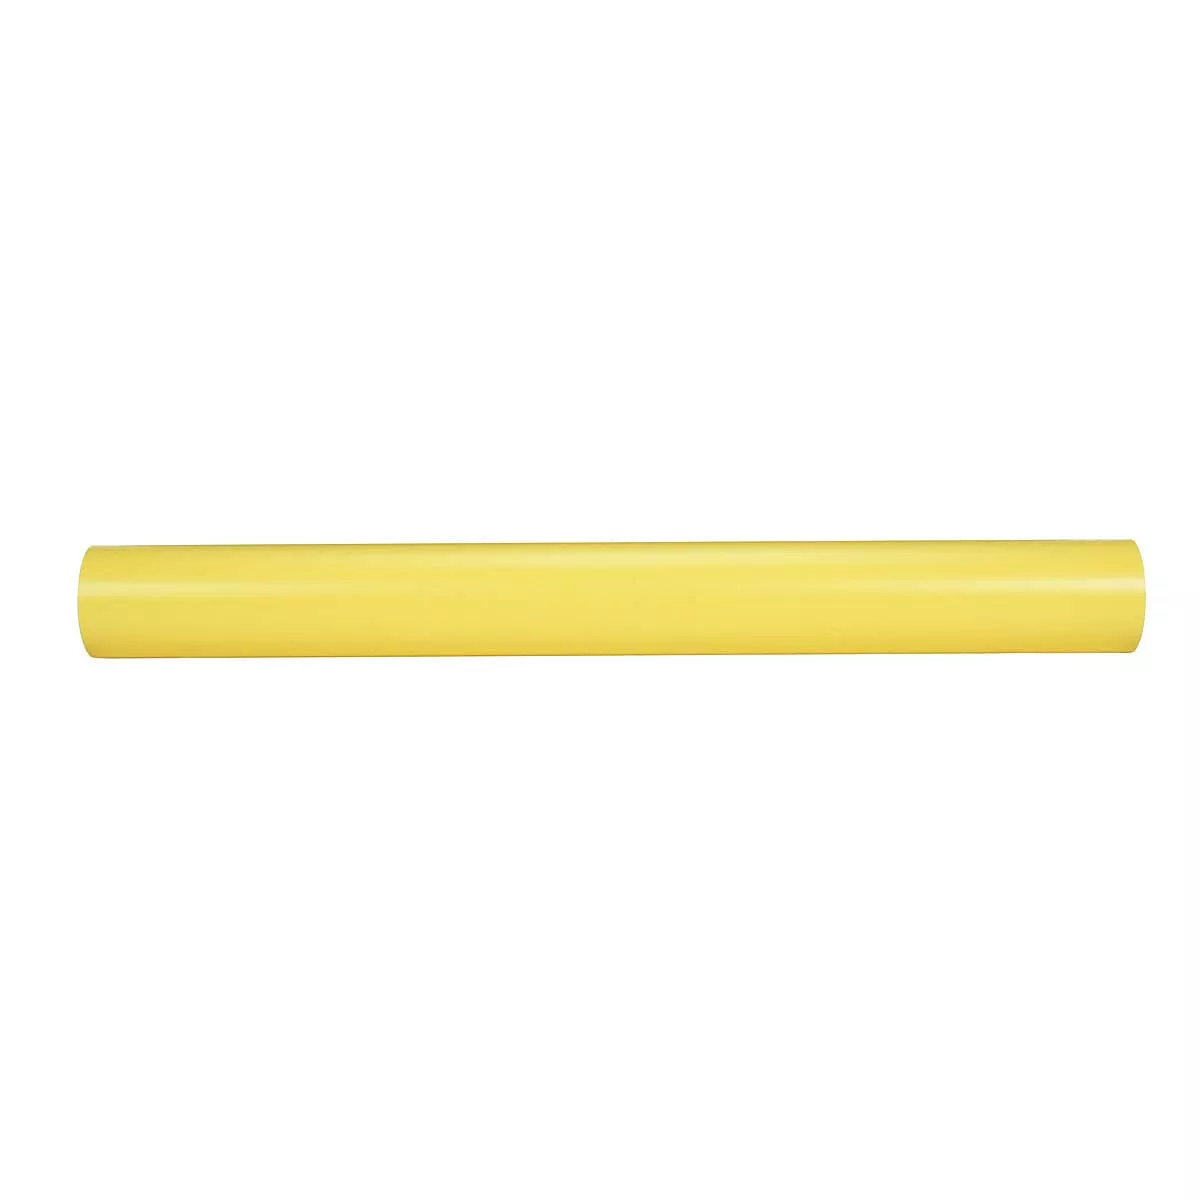 3M™ Cushion-Mount™ Plus Plate Mounting Tape E1315H, Yellow, 1372 mm x 33 m, 1 Roll/Case